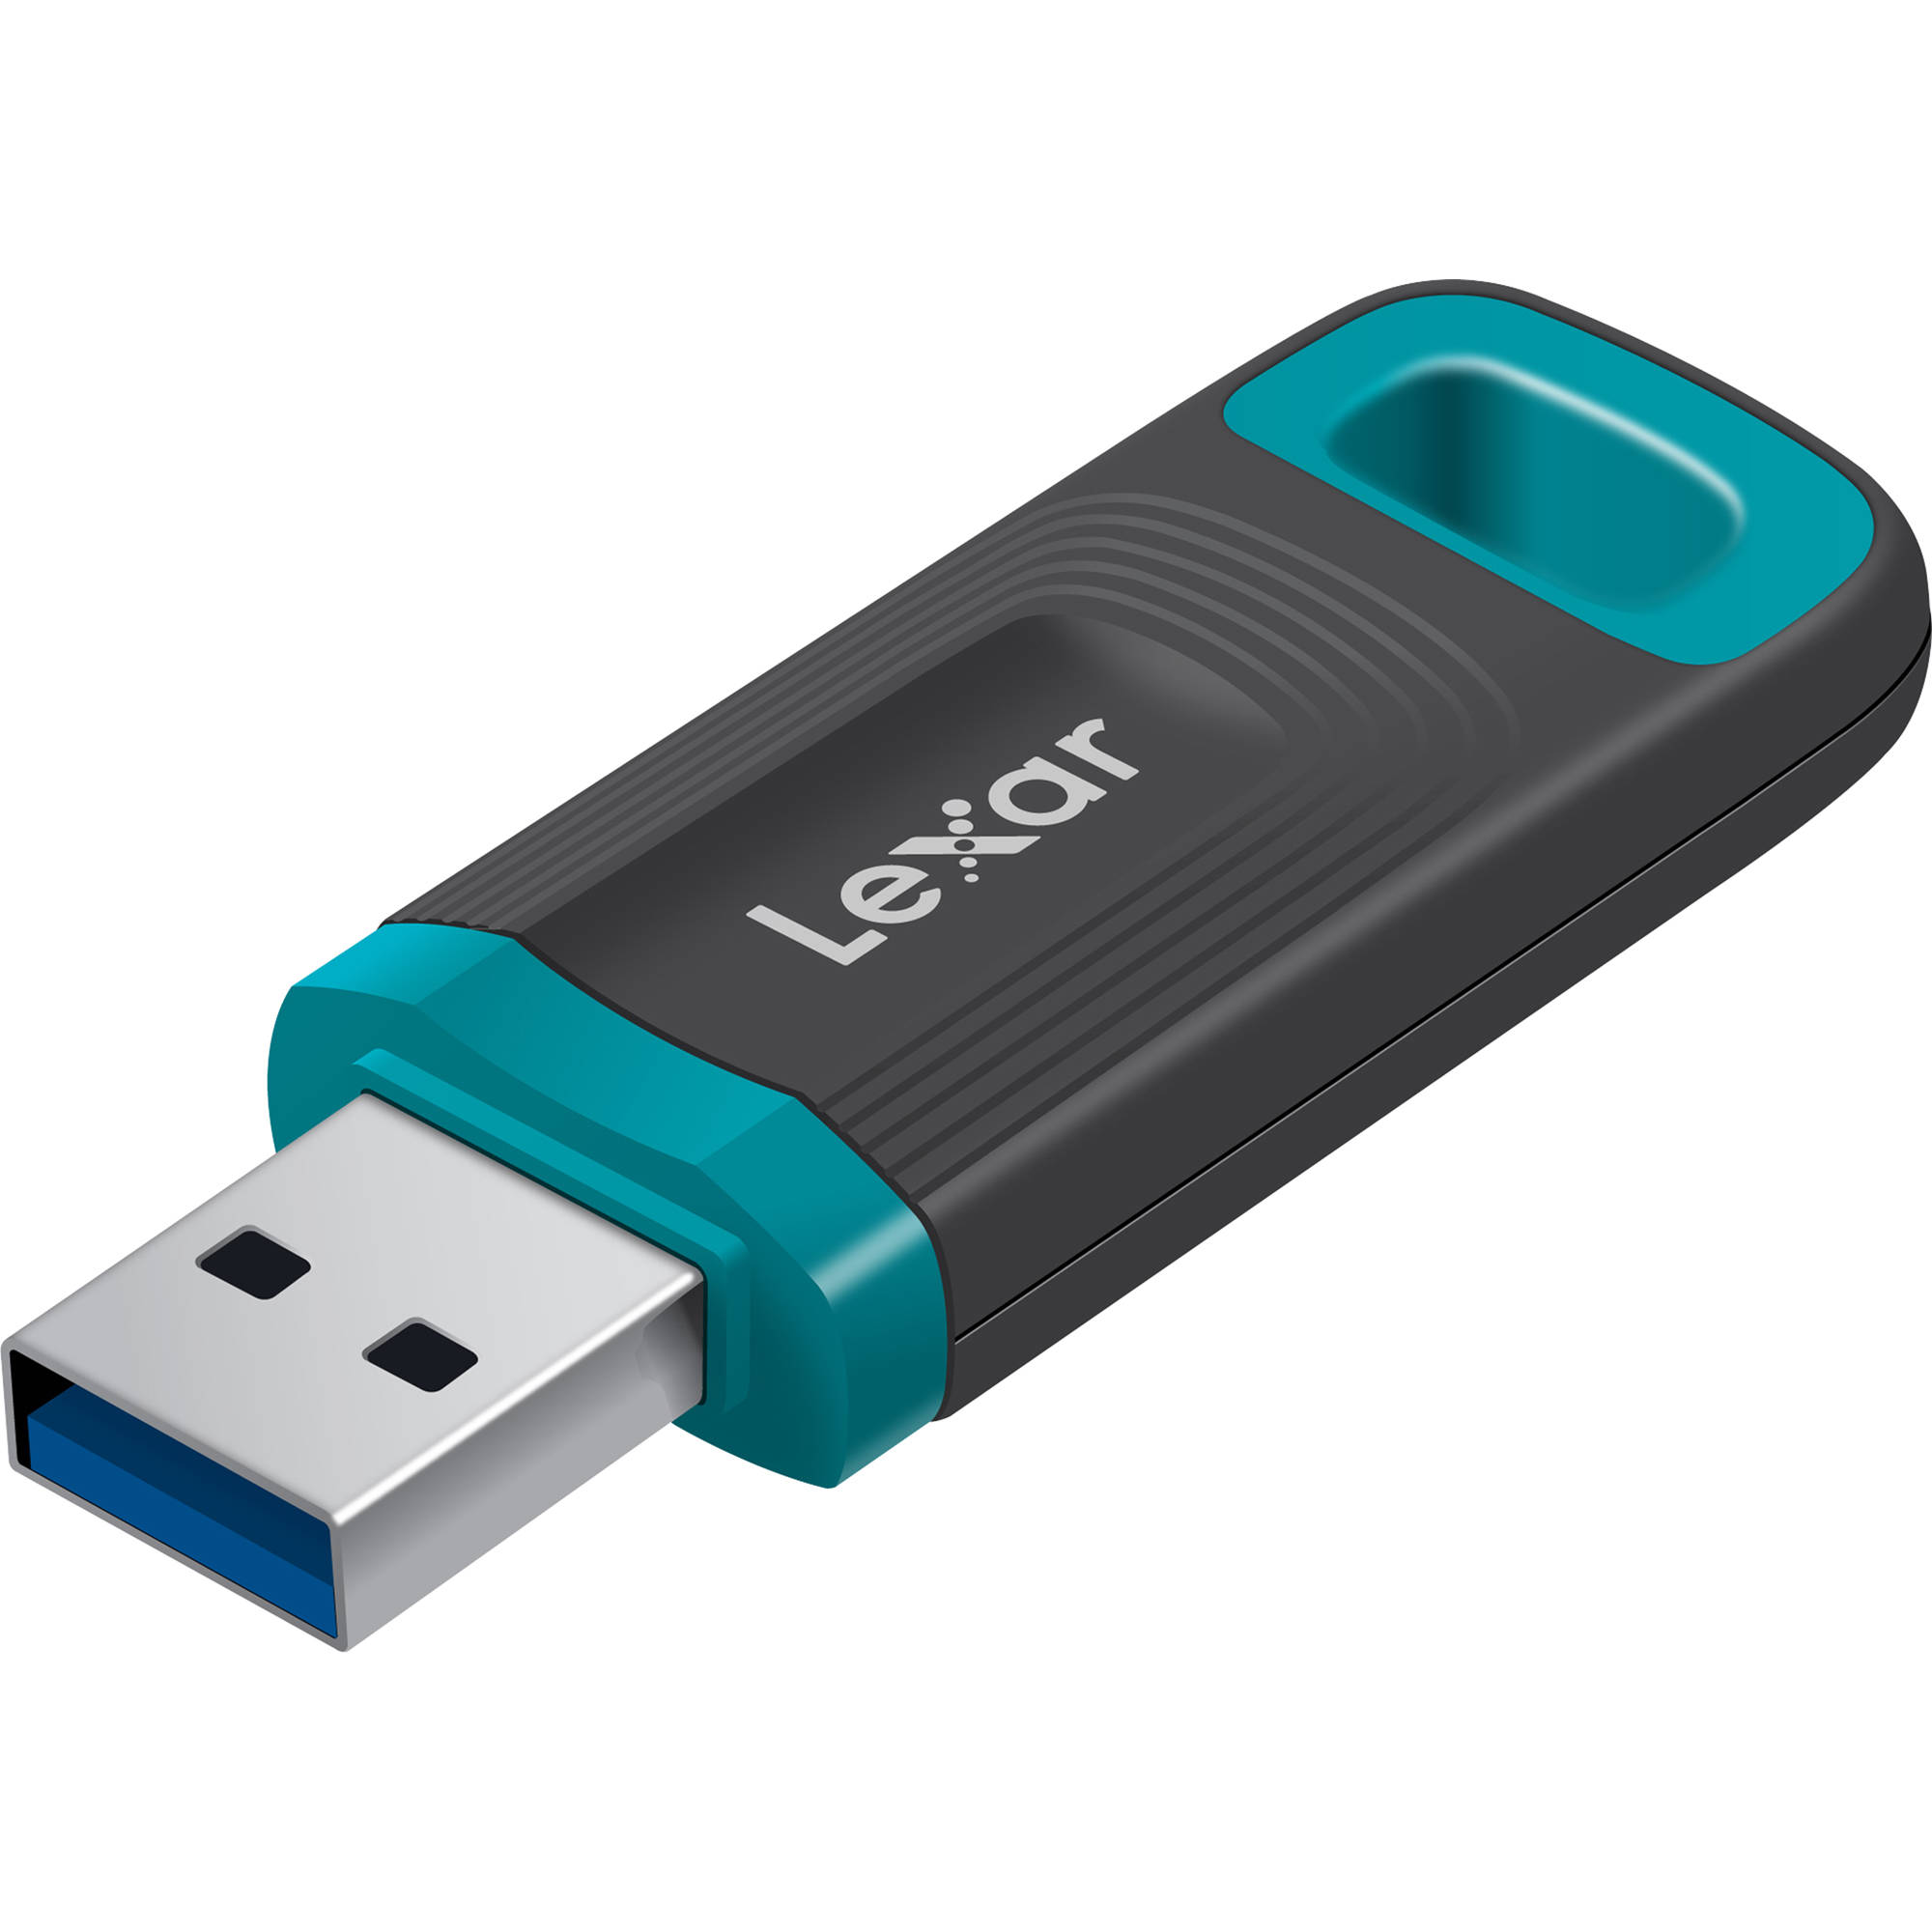 An image of a flash drive